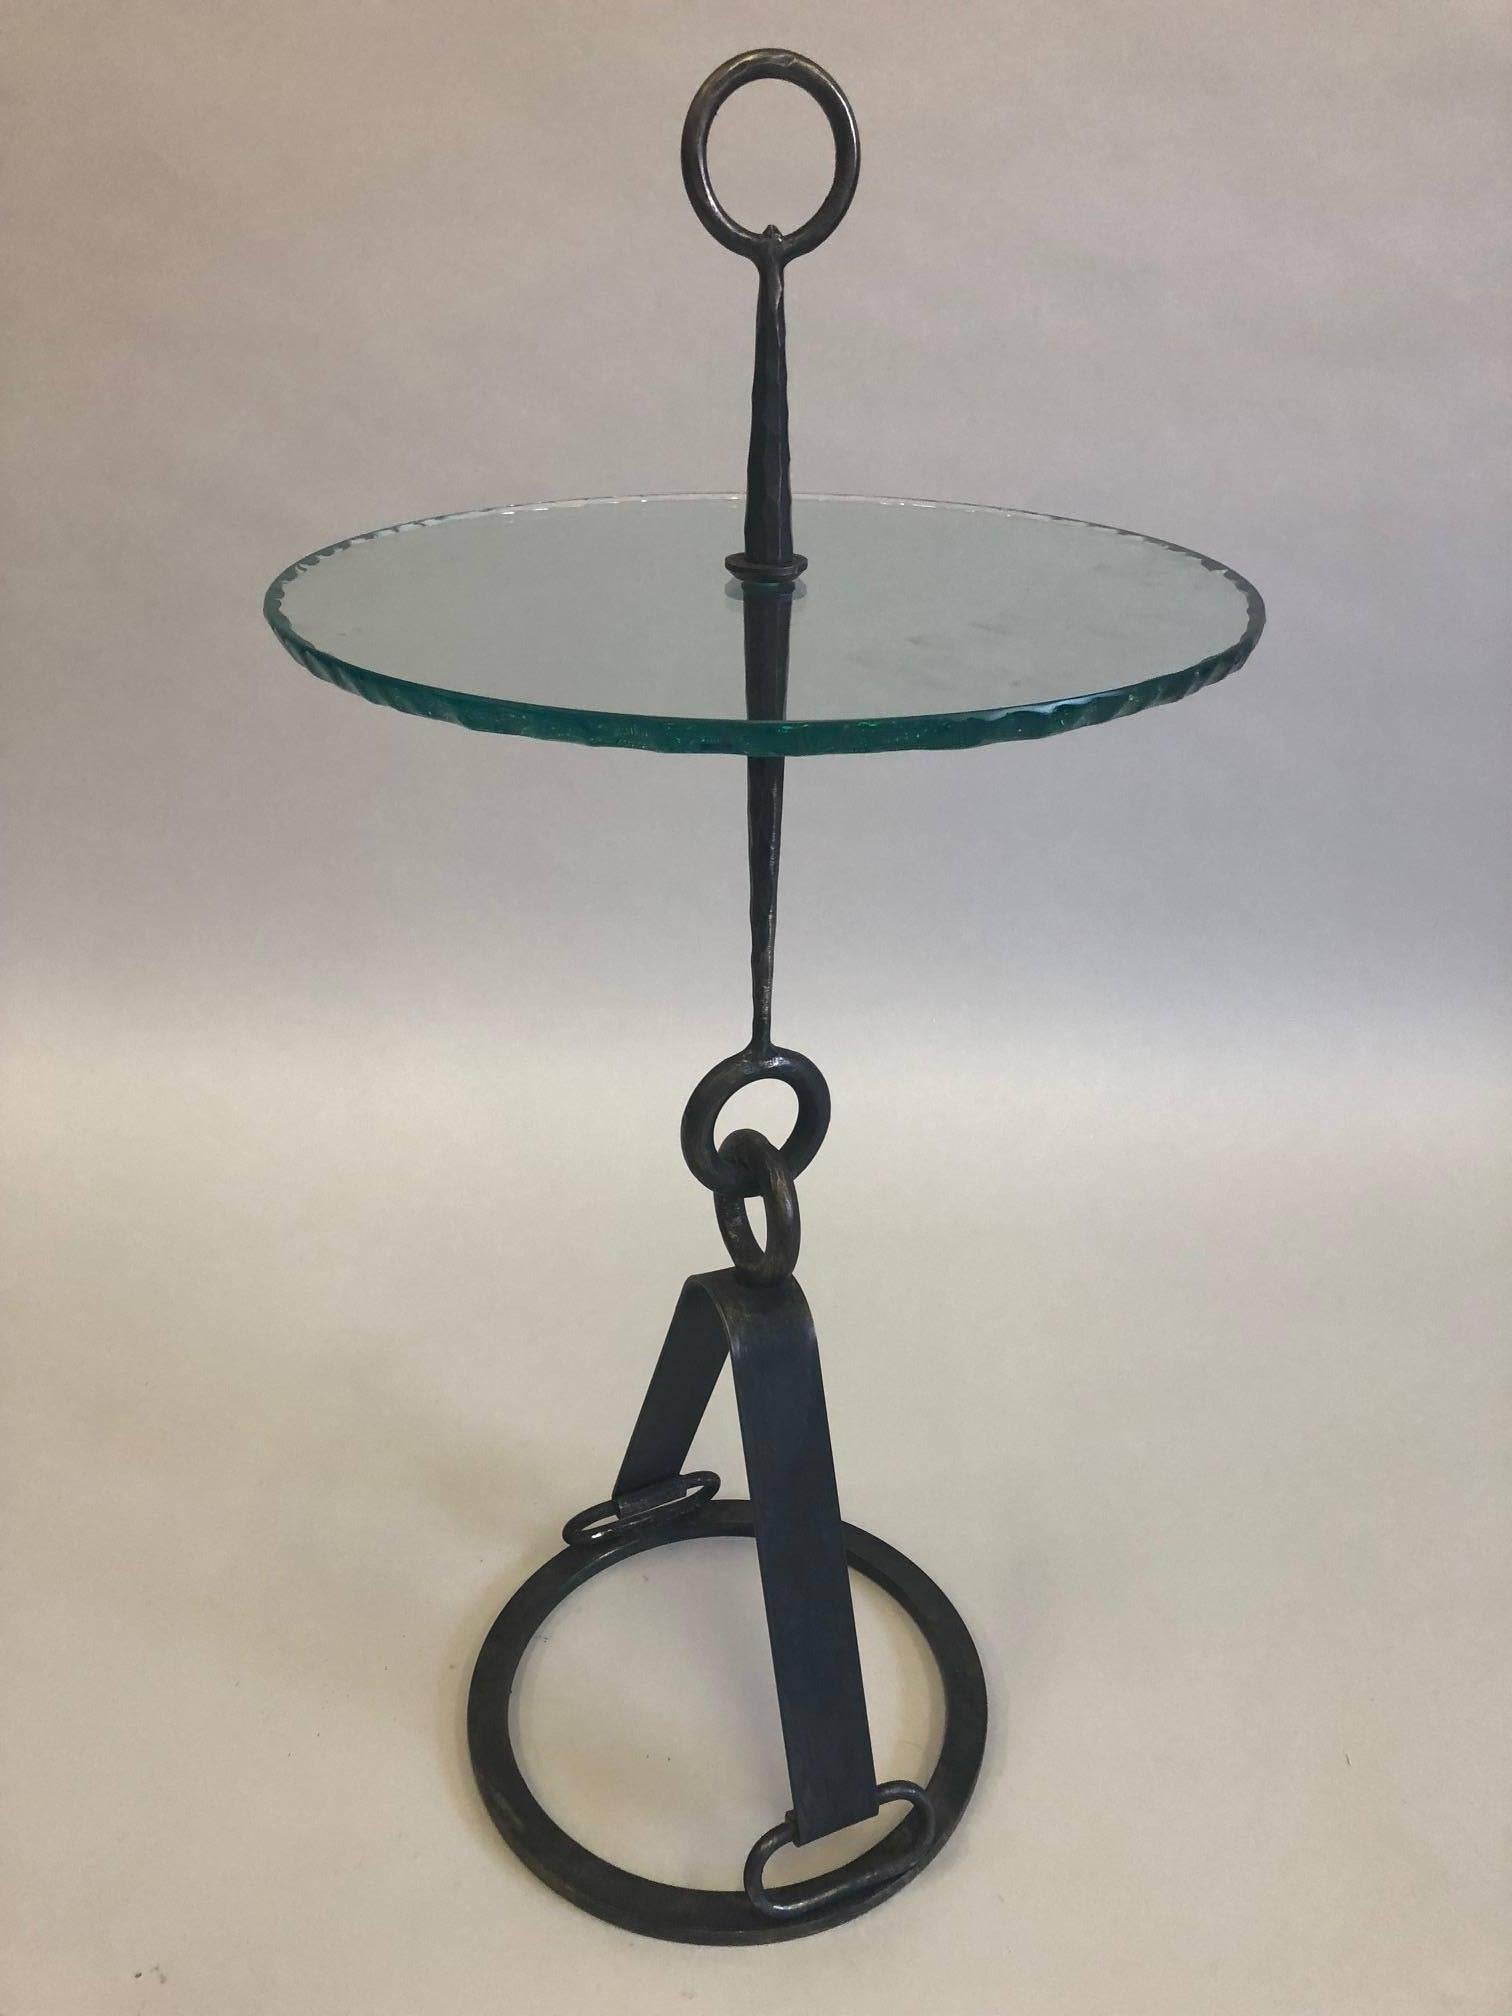 Rare and exquisite pair of Italian Mid-Century Modern neoclassical hand-hammered iron side tables or end tables or gueridons or cocktail tables by Giovanni Banci for Hermes

The tables feature stunning forms that transcend modern and neoclassical